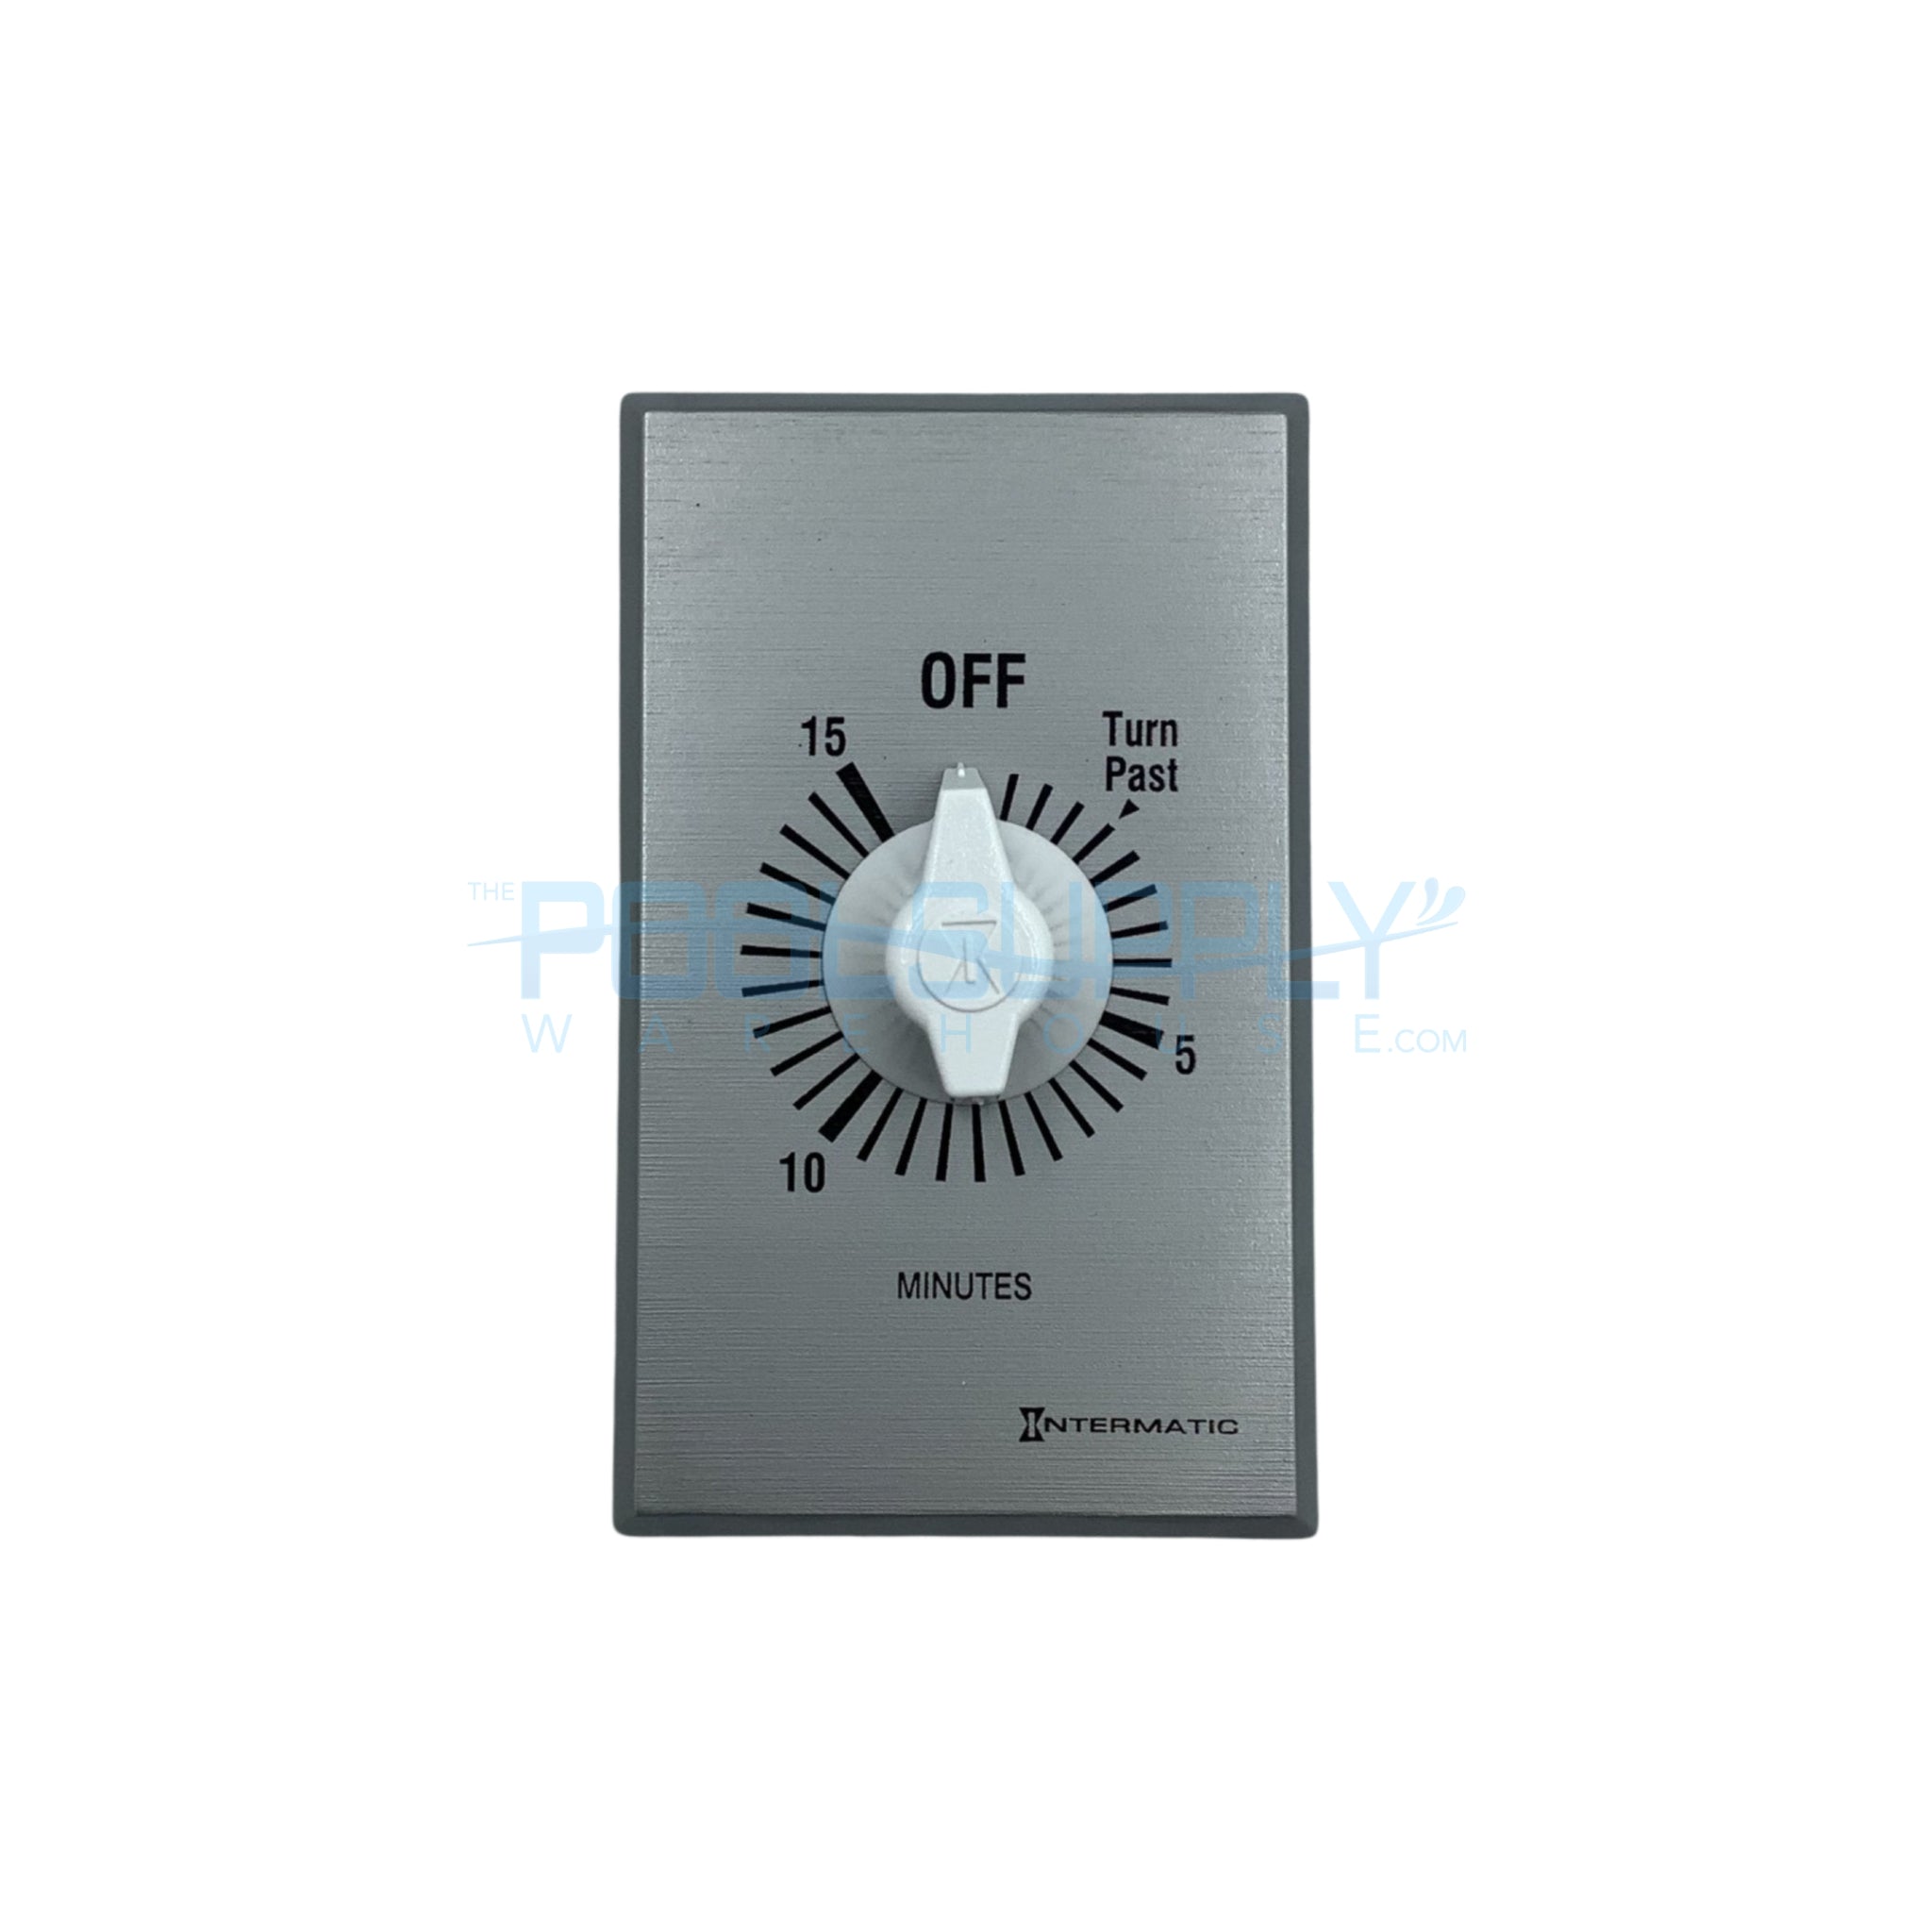 Intermatic Commercial Auto-Off Timer (15 Minutes) - FF15MC - The Pool Supply Warehouse